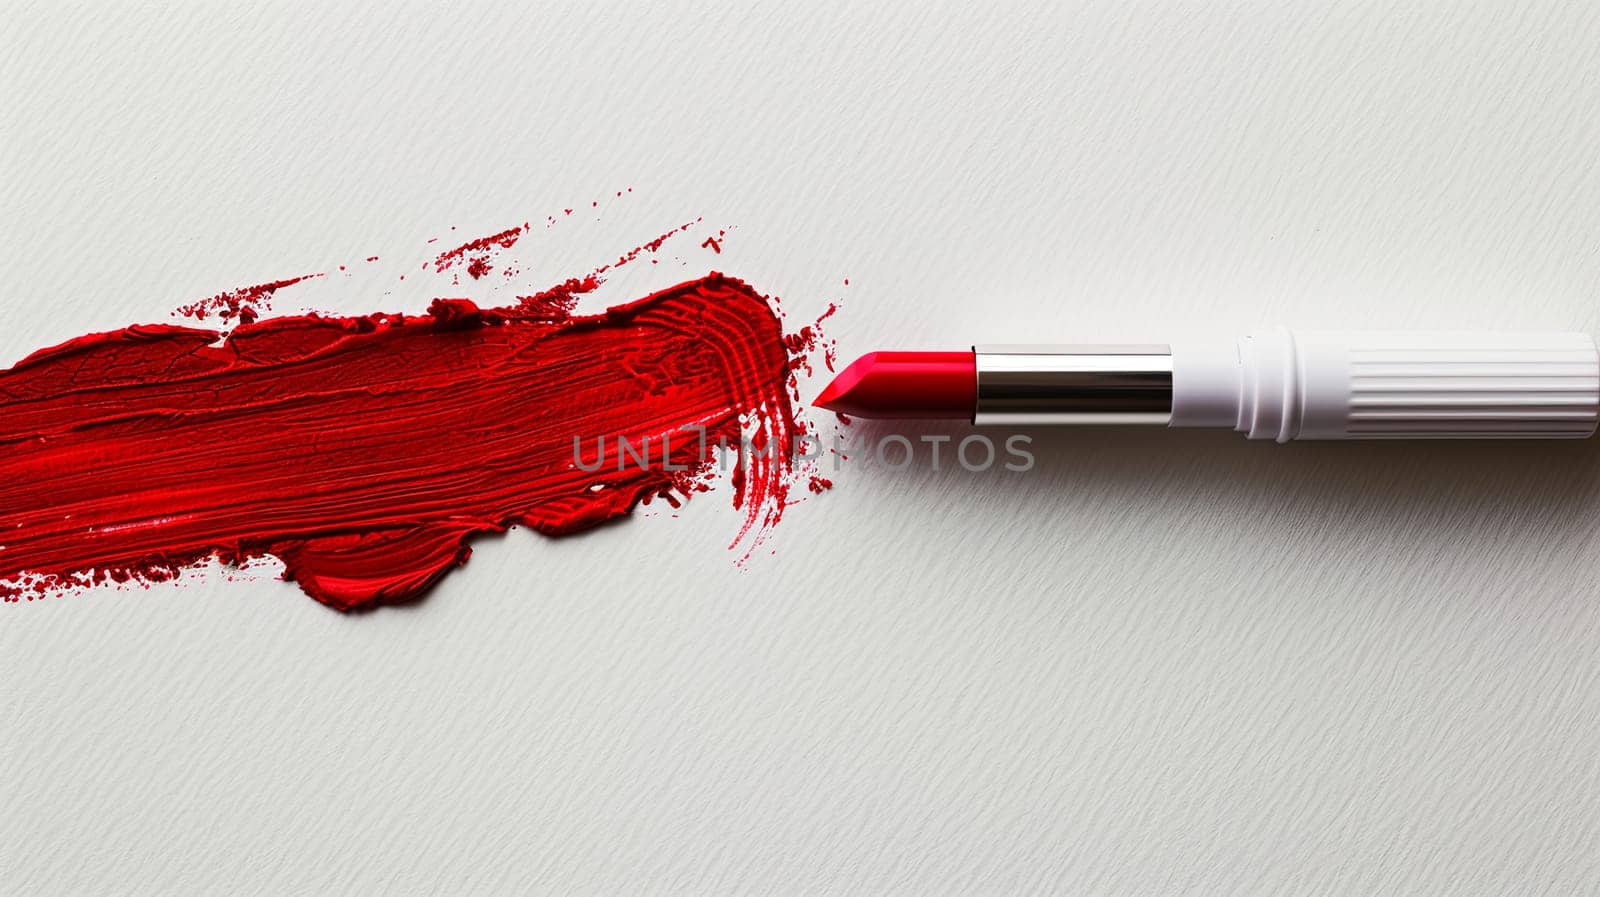 A close-up view of a vibrant red lipstick smudge on a pristine white surface.